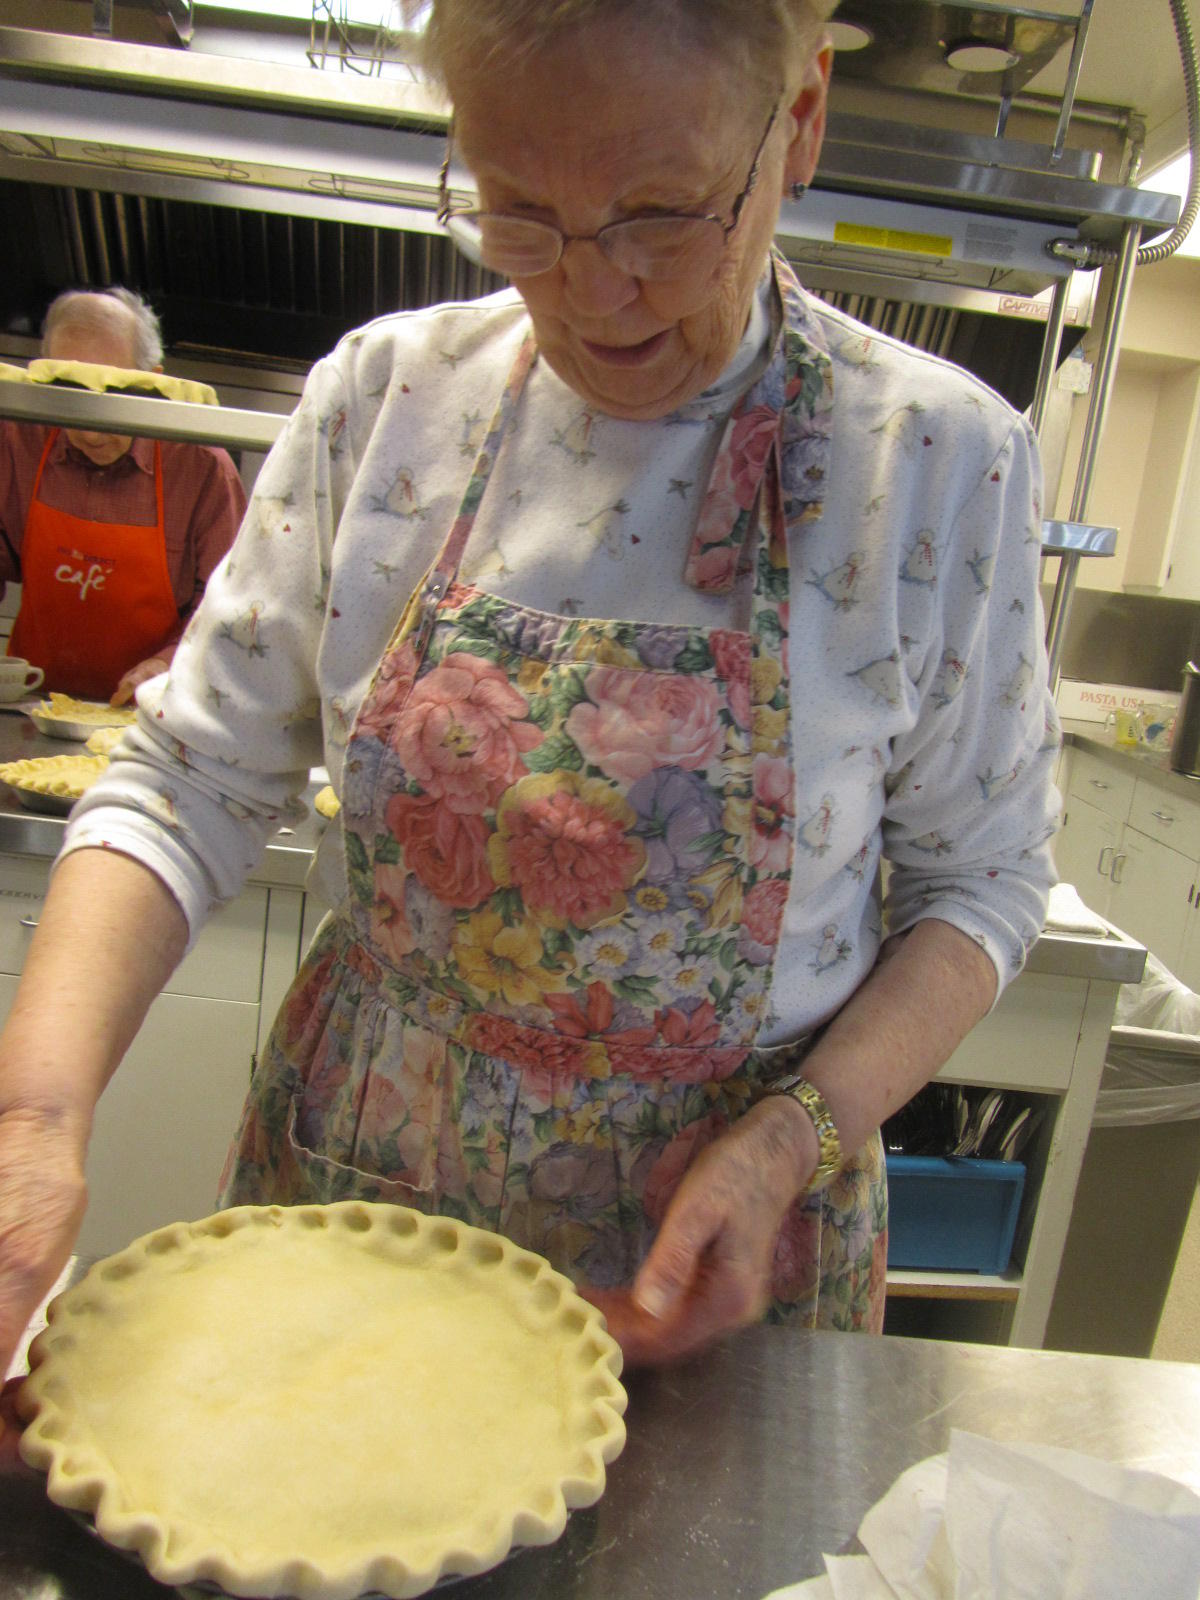 Fellowship And Tradition Go Into Pie Making For Lent In Boise Boise